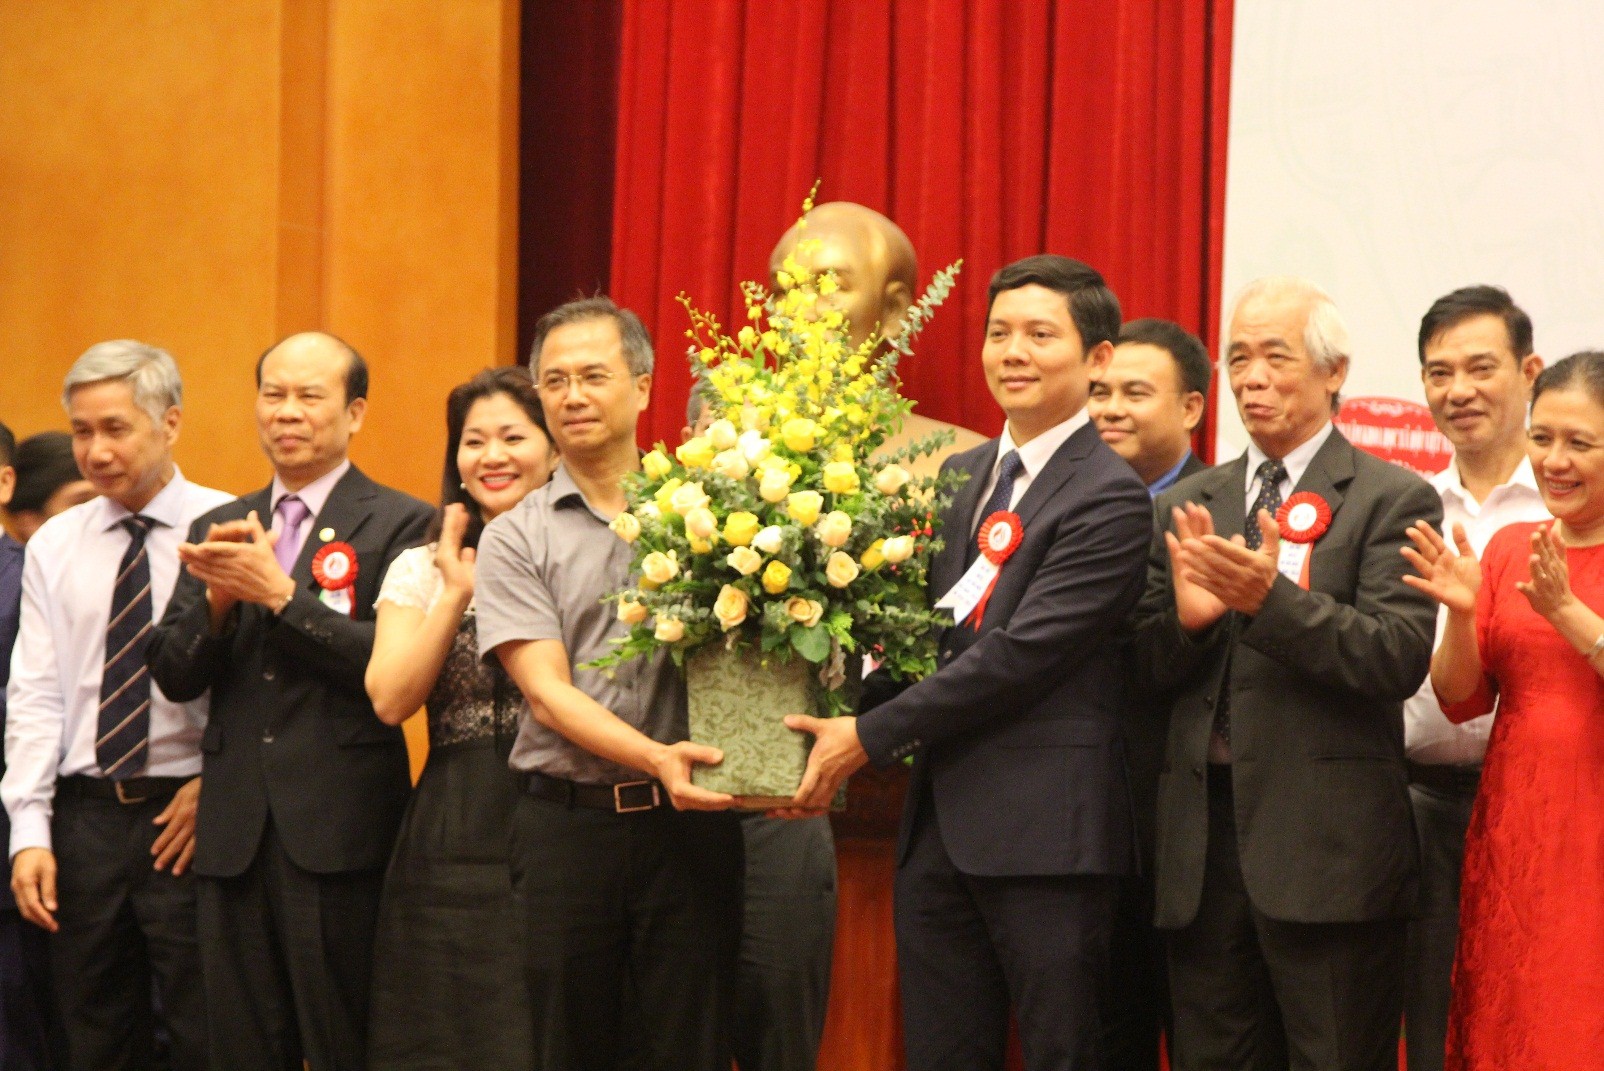 Dr. Dang Xuan Thanh - VASS Vice President presented congratulation flowers to Assoc.Prof.Dr. Bui Nhat Quang at the Congress